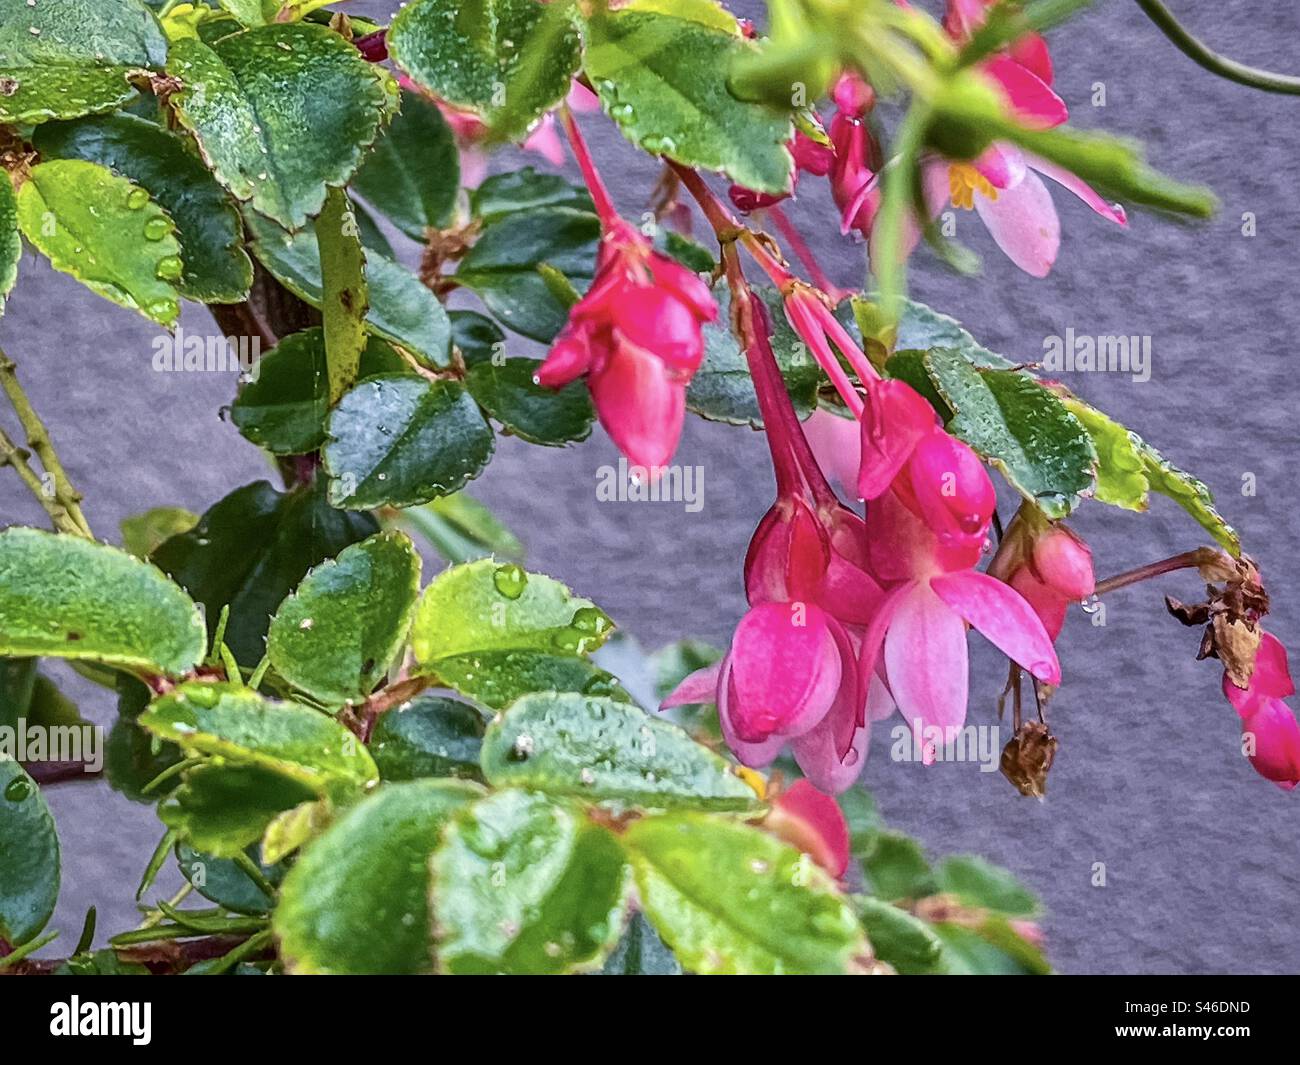 Close-up of bright pink flowers of fuchsia begonia/ begonia fuchsioides also known as shrub begonia with rain droplets on flowers and leaves against wall. Stock Photo